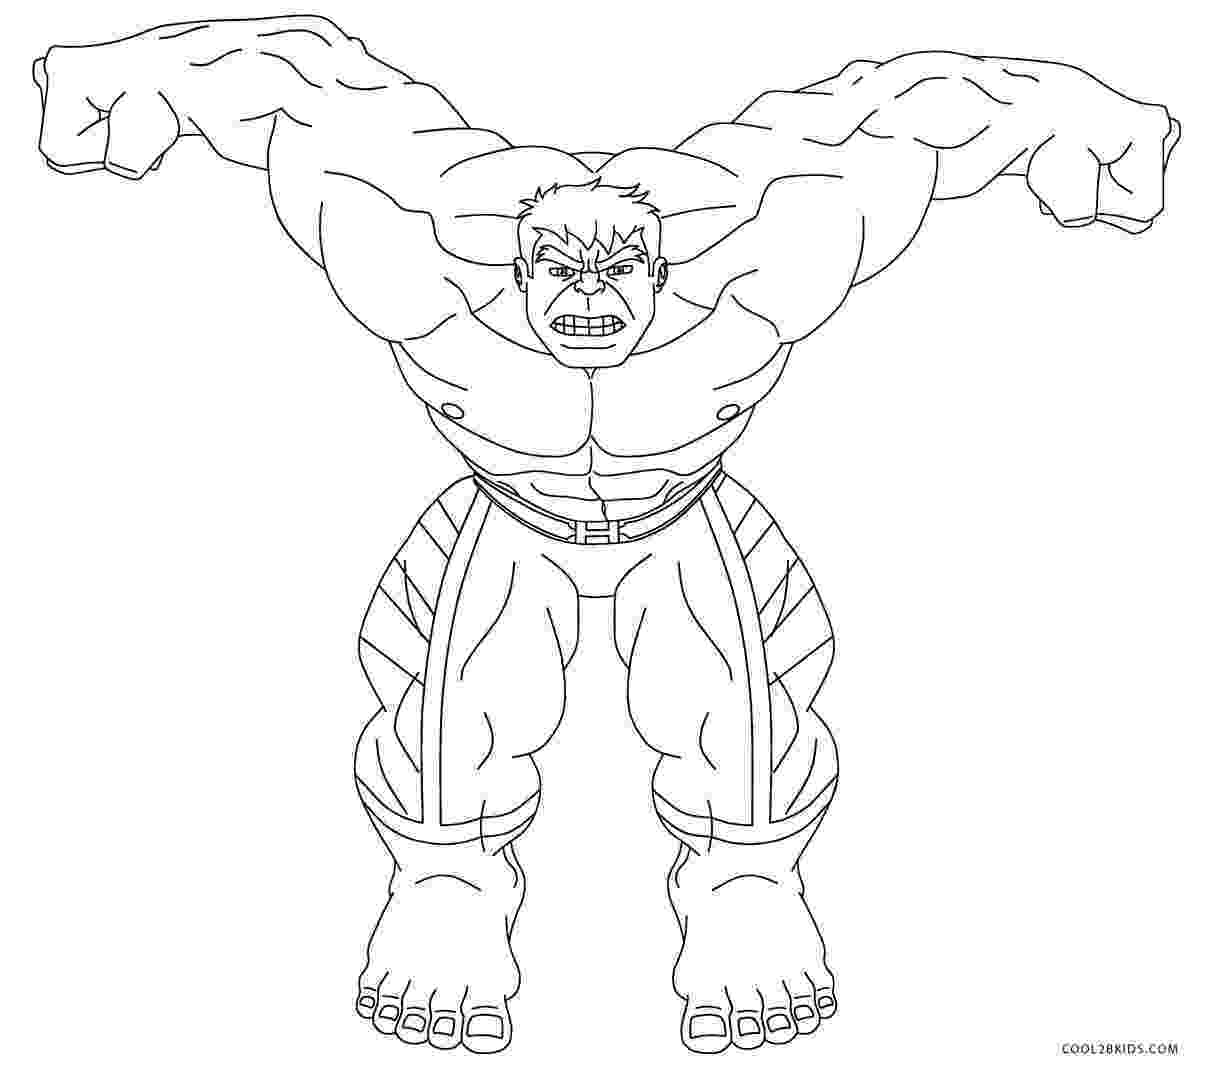 hulk colouring pictures free printable hulk coloring pages for kids cool2bkids colouring pictures hulk 1 1